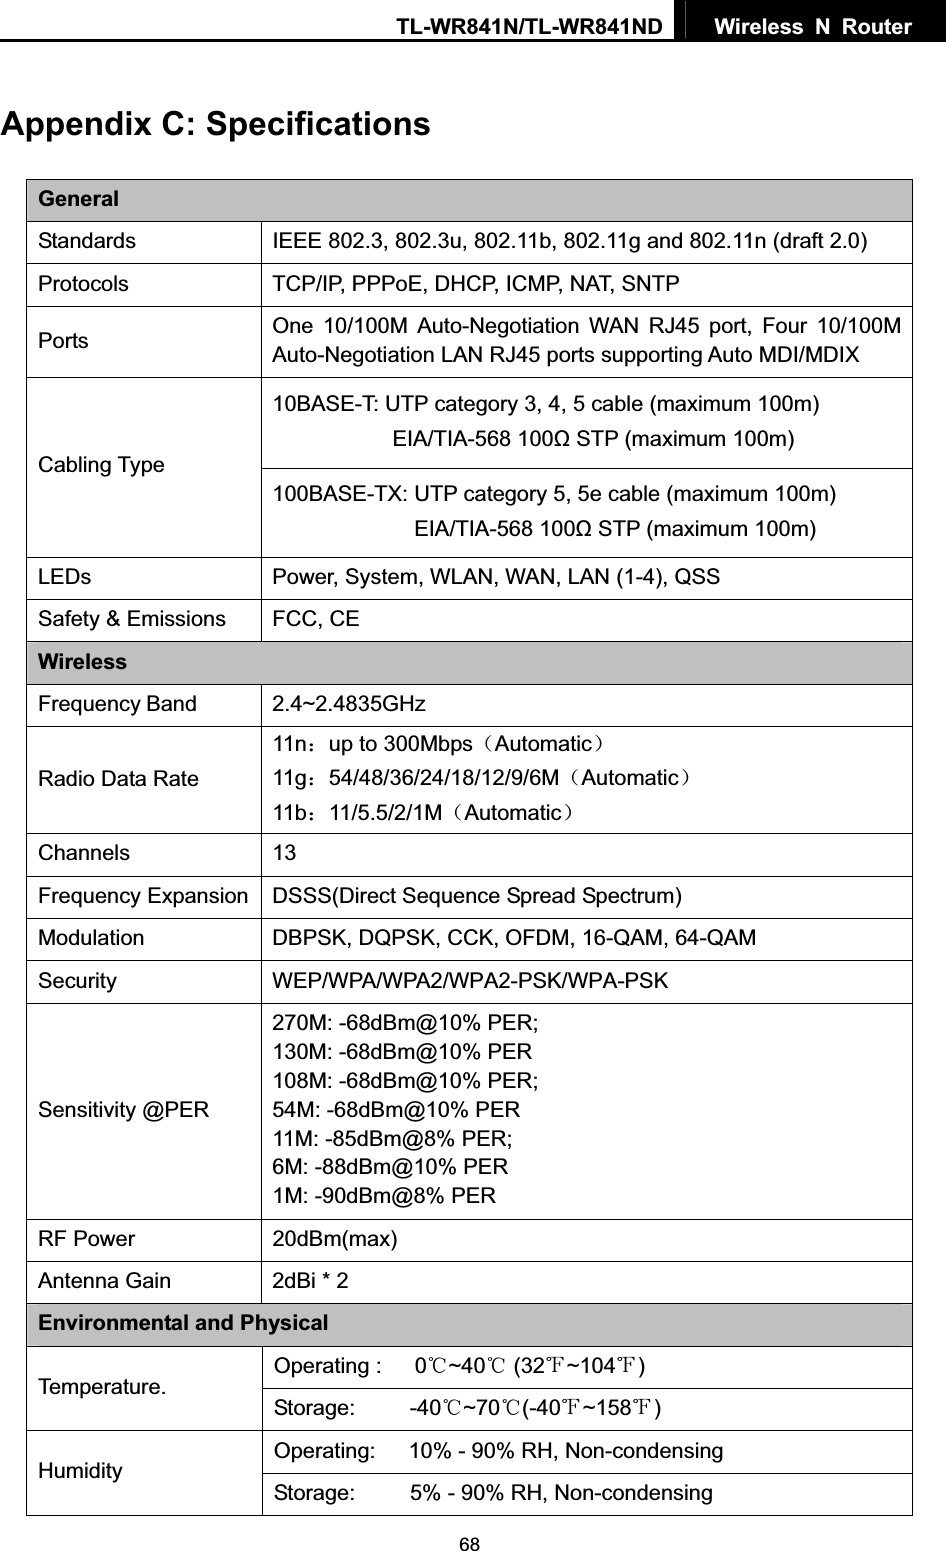 TL-WR841N/TL-WR841ND  Wireless N Router  68Appendix C: Specifications GeneralStandards  IEEE 802.3, 802.3u, 802.11b, 802.11g and 802.11n (draft 2.0) Protocols  TCP/IP, PPPoE, DHCP, ICMP, NAT, SNTP Ports  One 10/100M Auto-Negotiation WAN RJ45 port, Four 10/100M Auto-Negotiation LAN RJ45 ports supporting Auto MDI/MDIX 10BASE-T: UTP category 3, 4, 5 cable (maximum 100m) EIA/TIA-568 100ȍ STP (maximum 100m) Cabling Type 100BASE-TX: UTP category 5, 5e cable (maximum 100m) EIA/TIA-568 100ȍ STP (maximum 100m) LEDs Power, System, WLAN, WAN, LAN (1-4), QSS Safety &amp; Emissions  FCC, CE Wireless Frequency Band 2.4~2.4835GHz Radio Data Rate 11n˖up to 300Mbps˄Automatic˅11g˖54/48/36/24/18/12/9/6M˄Automatic˅11b˖11/5.5/2/1M˄Automatic˅Channels 13 Frequency Expansion  DSSS(Direct Sequence Spread Spectrum) Modulation DBPSK, DQPSK, CCK, OFDM, 16-QAM, 64-QAM Security WEP/WPA/WPA2/WPA2-PSK/WPA-PSK Sensitivity @PER 270M: -68dBm@10% PER; 130M: -68dBm@10% PER 108M: -68dBm@10% PER;   54M: -68dBm@10% PER 11M: -85dBm@8% PER;   6M: -88dBm@10% PER 1M: -90dBm@8% PER RF Power  20dBm(max) Antenna Gain  2dBi * 2   Environmental and Physical Operating :   0ć~40ć (32 ~104̧̧)Temperature.  Storage:     -40ć~70ć(-40̧~158̧)Operating:      10% - 90% RH, Non-condensing Humidity Storage:          5% - 90% RH, Non-condensing 